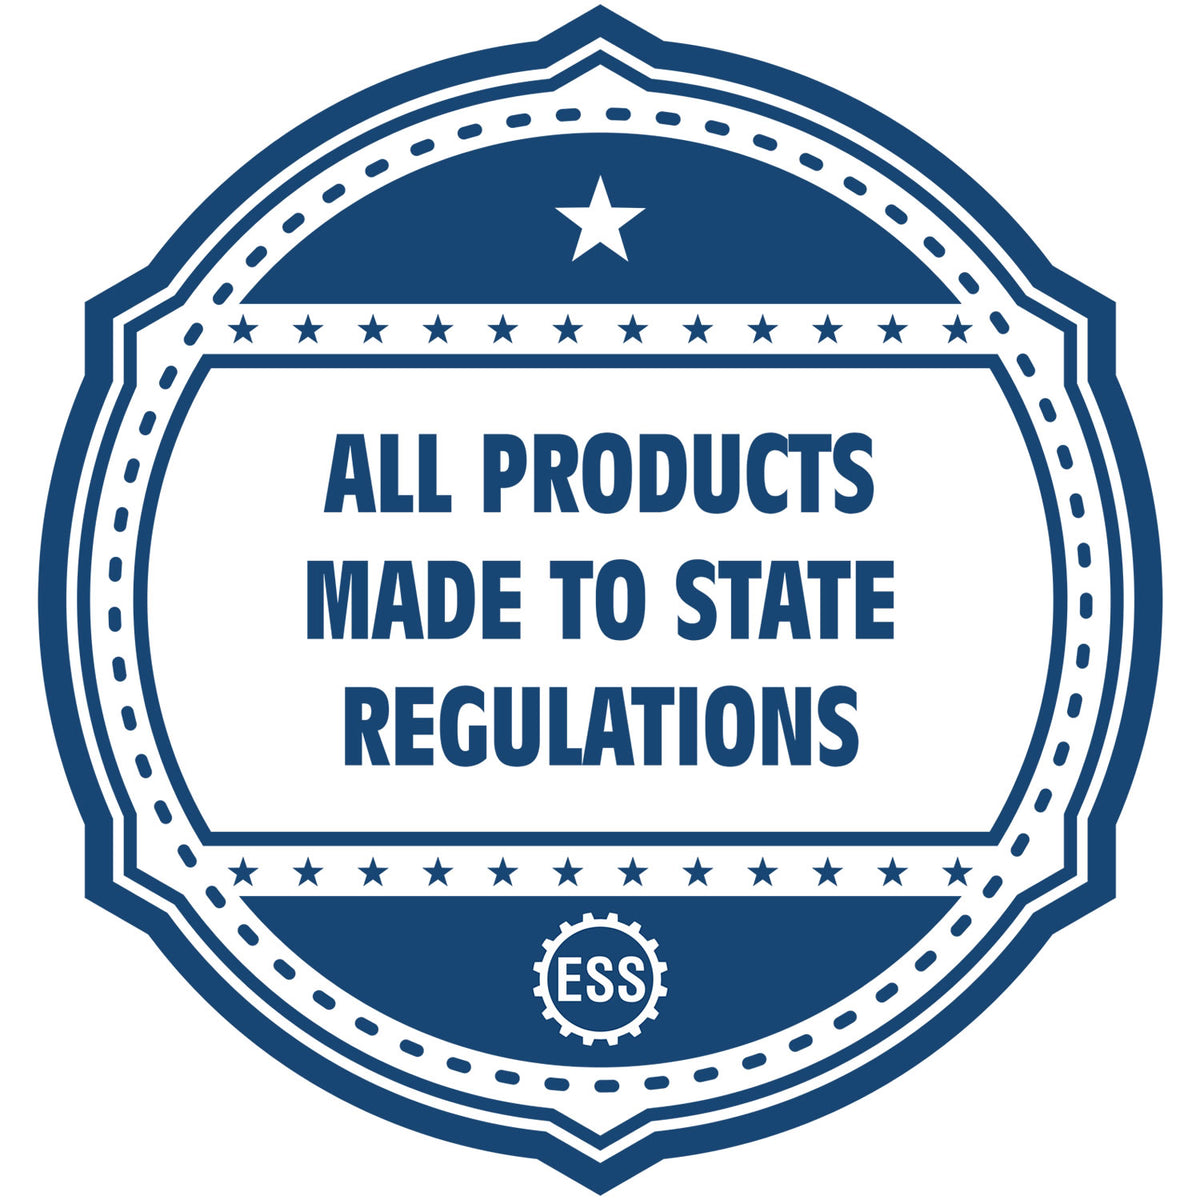 An icon or badge element for the Slim Pre-Inked South Carolina Landscape Architect Seal Stamp showing that this product is made in compliance with state regulations.